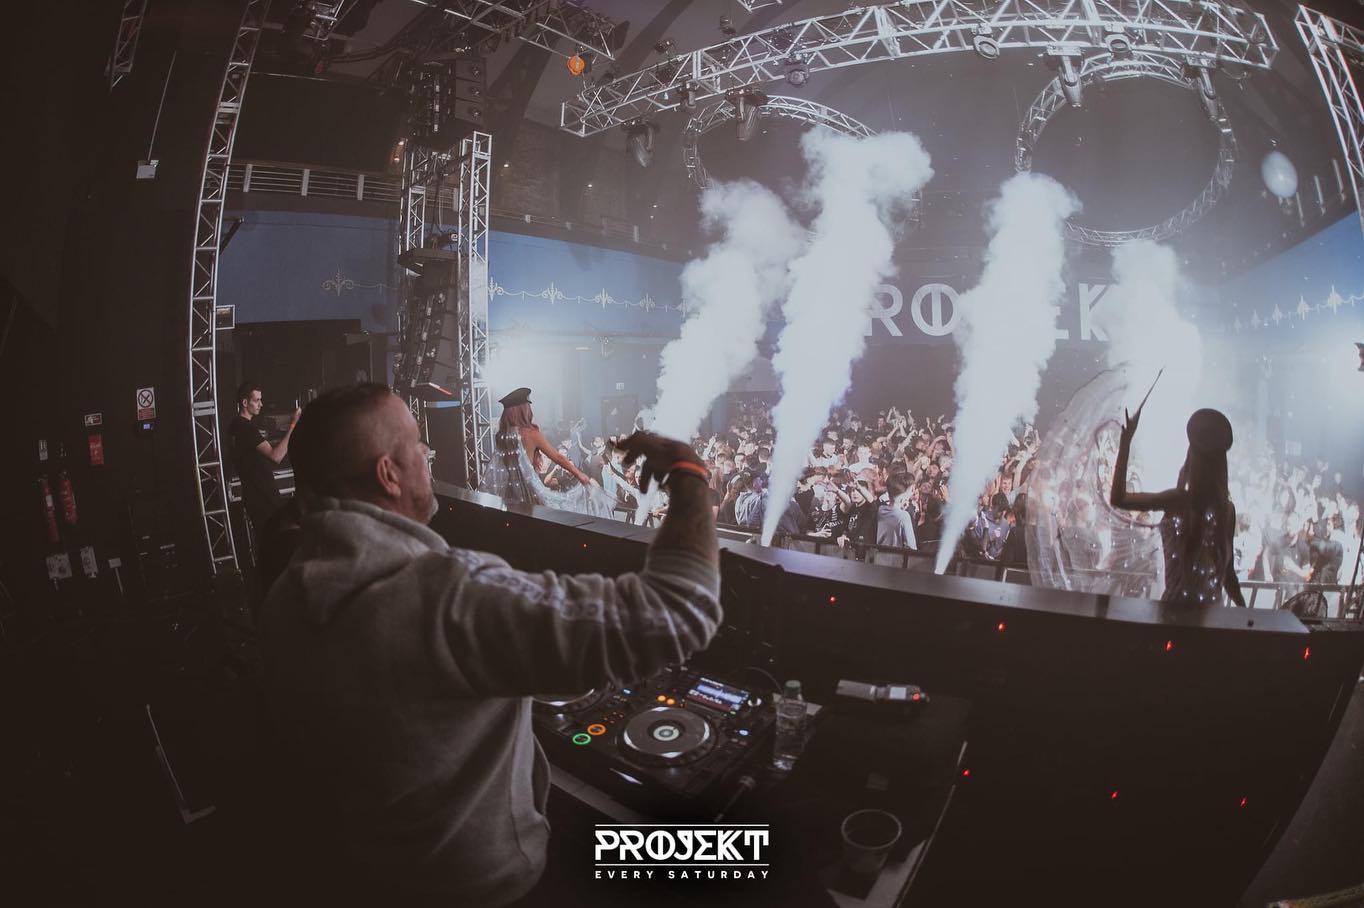 DJ performing at PROJEKT at the 02 in Leeds.